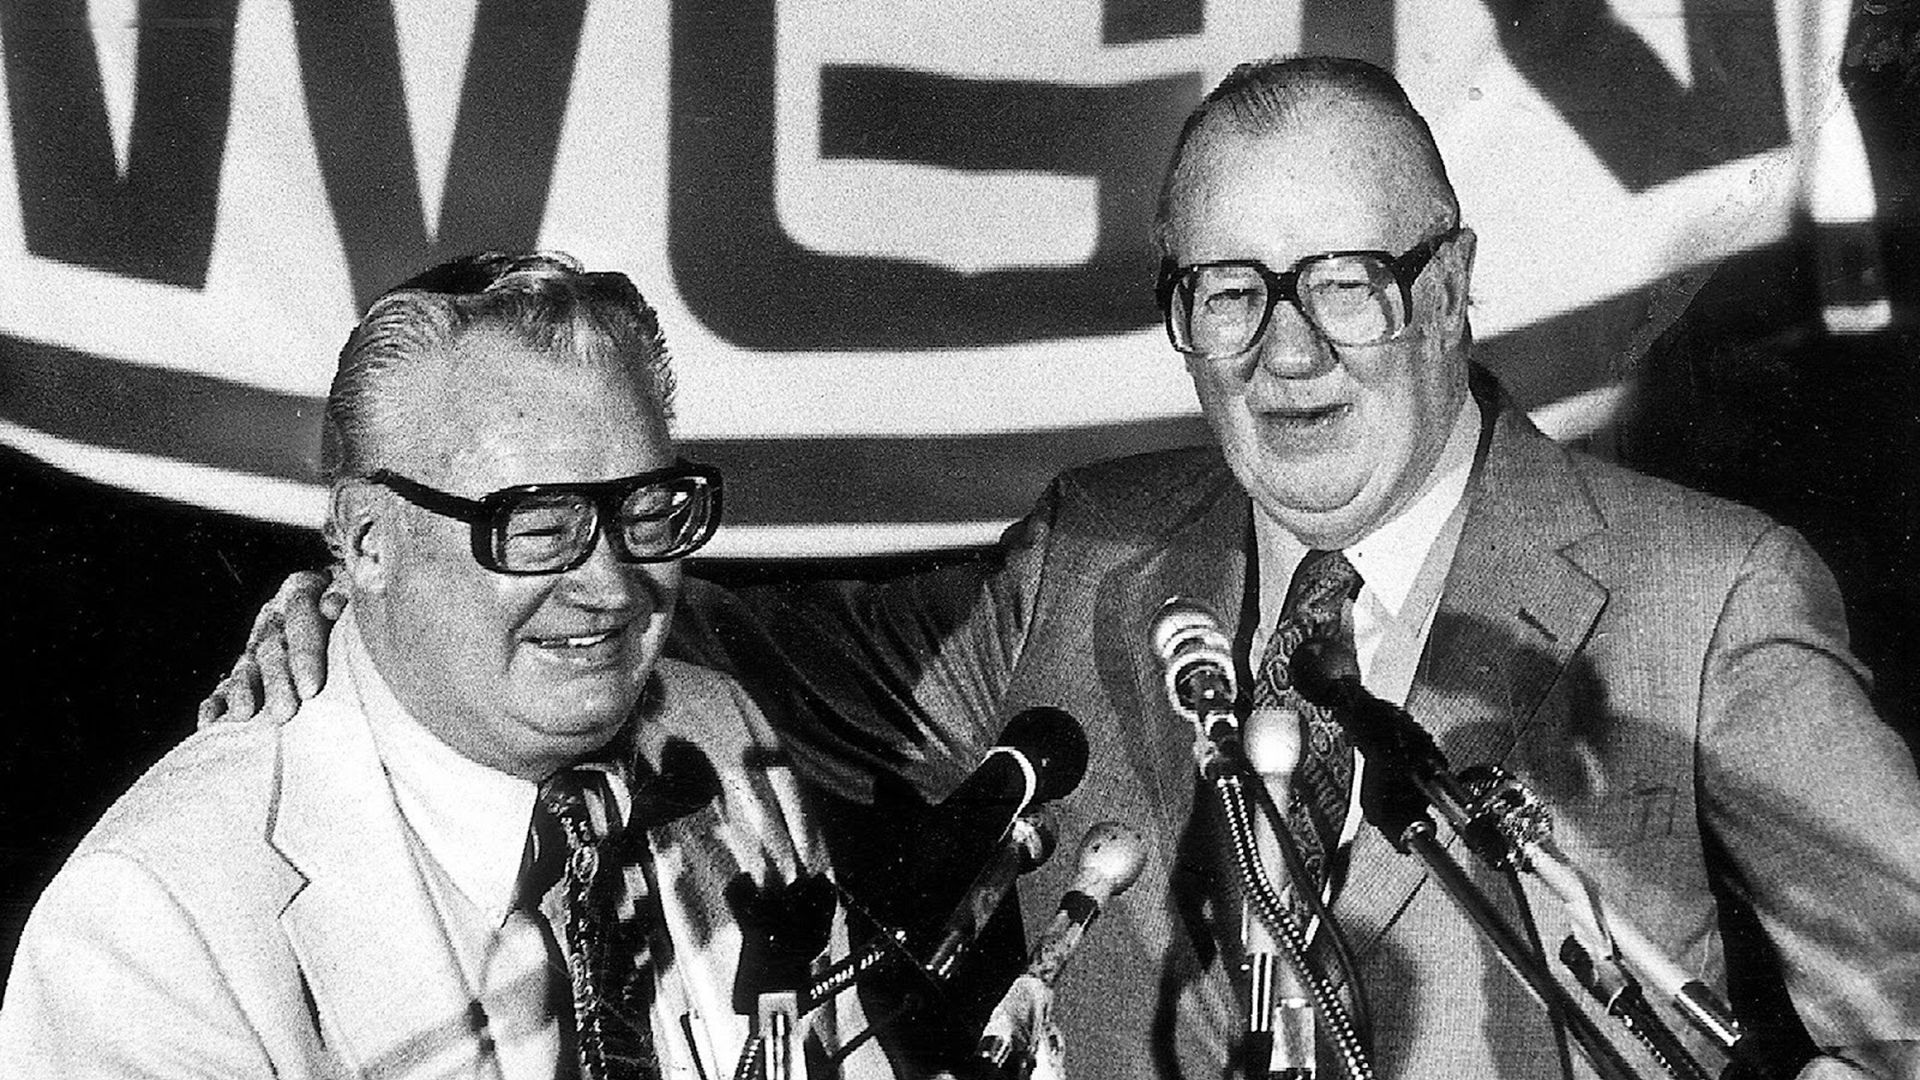 Was Harry Caray actually a good baseball broadcaster, or was he